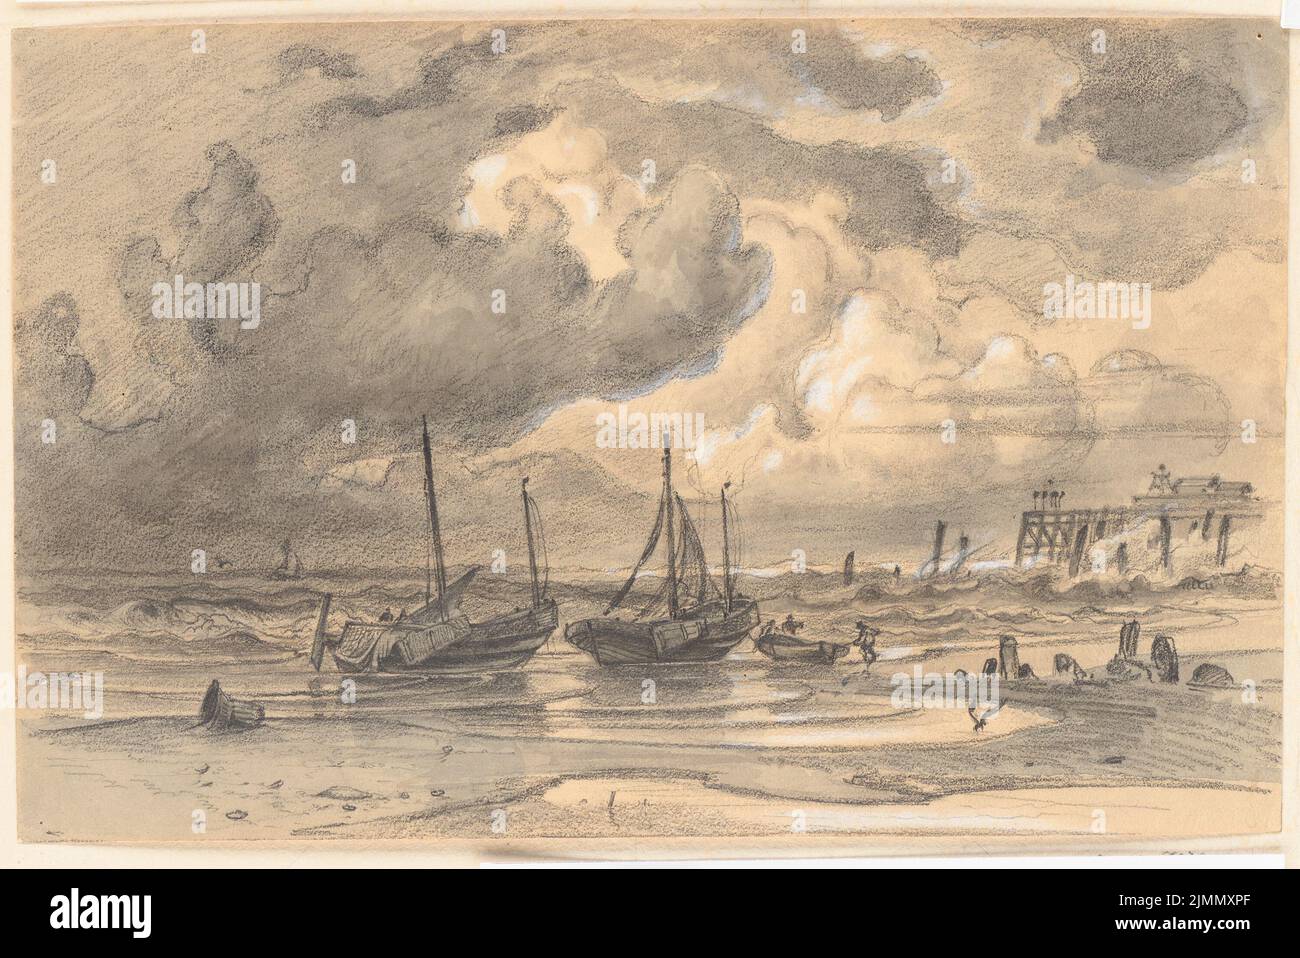 Köhler Karl, boats on the beach (without date): View. Coal watercolor, white heighted on the cardboard, 22.7 x 33.9 cm (including scan edges) Stock Photo